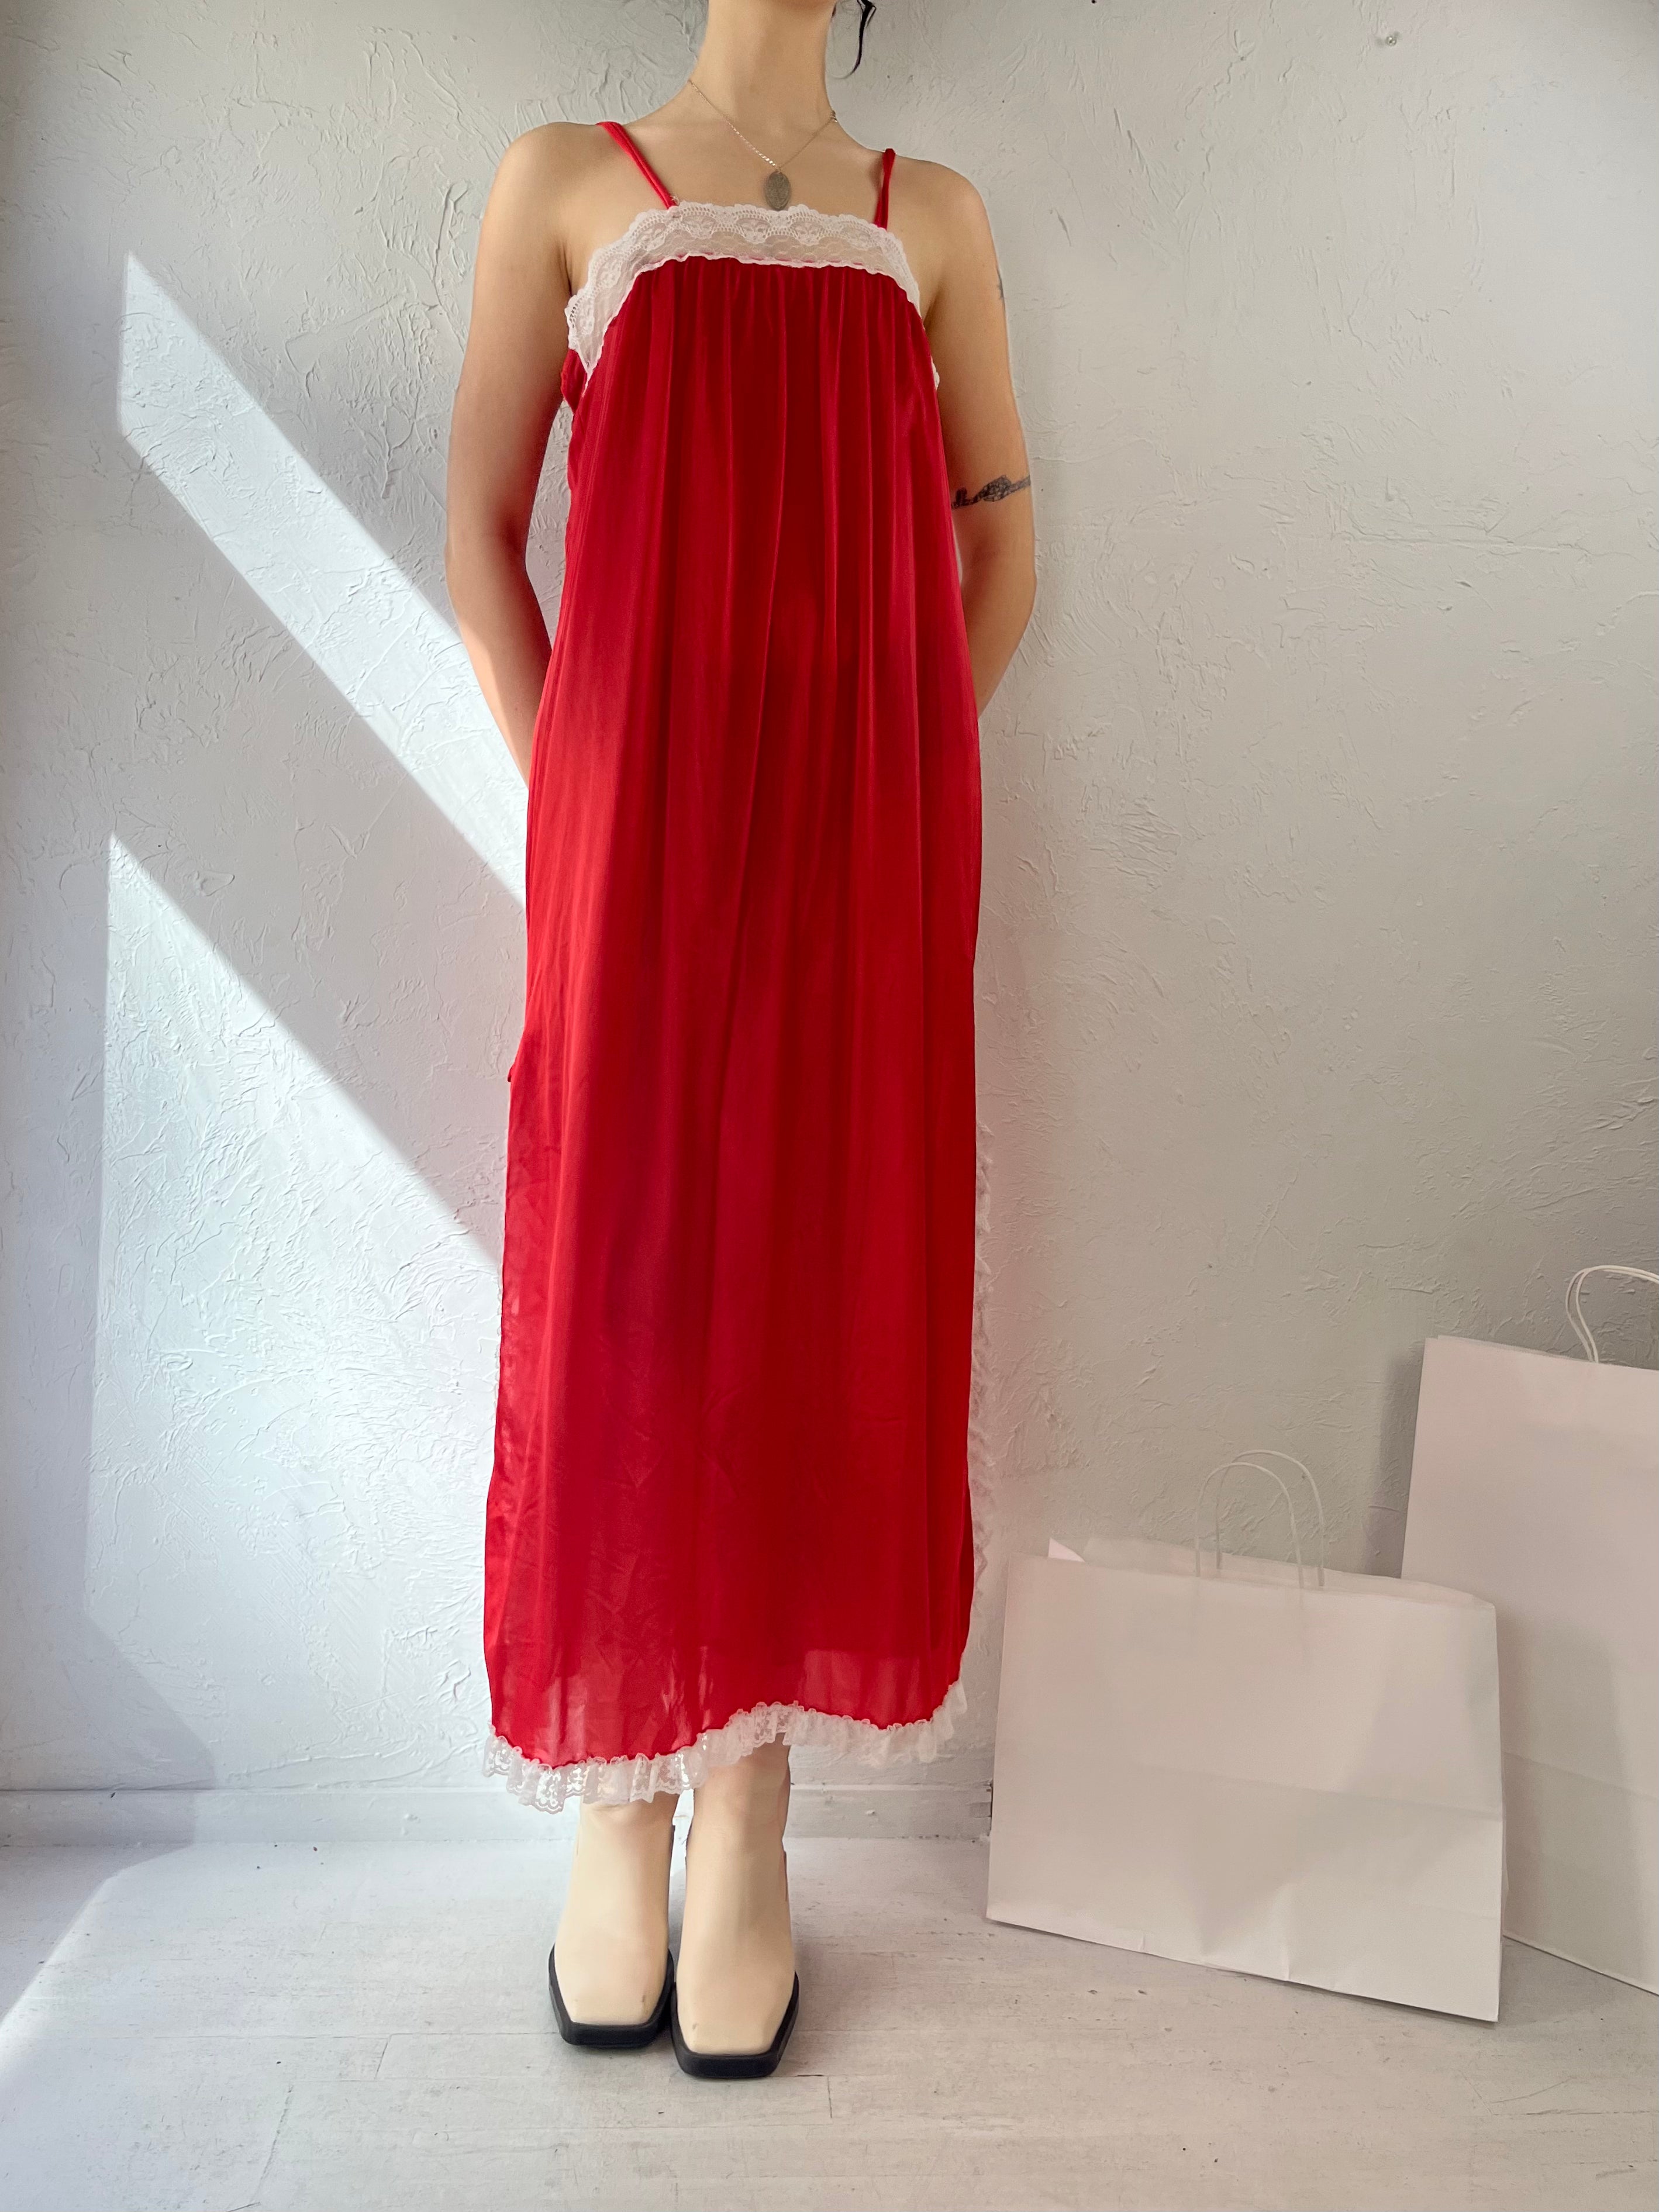 Vintage 70s Red Lingerie Midi Slip by Nordstroms, Union Label, Small Lace  Trims, Vintage Classic Slips, 100% Nylon, Size Small 